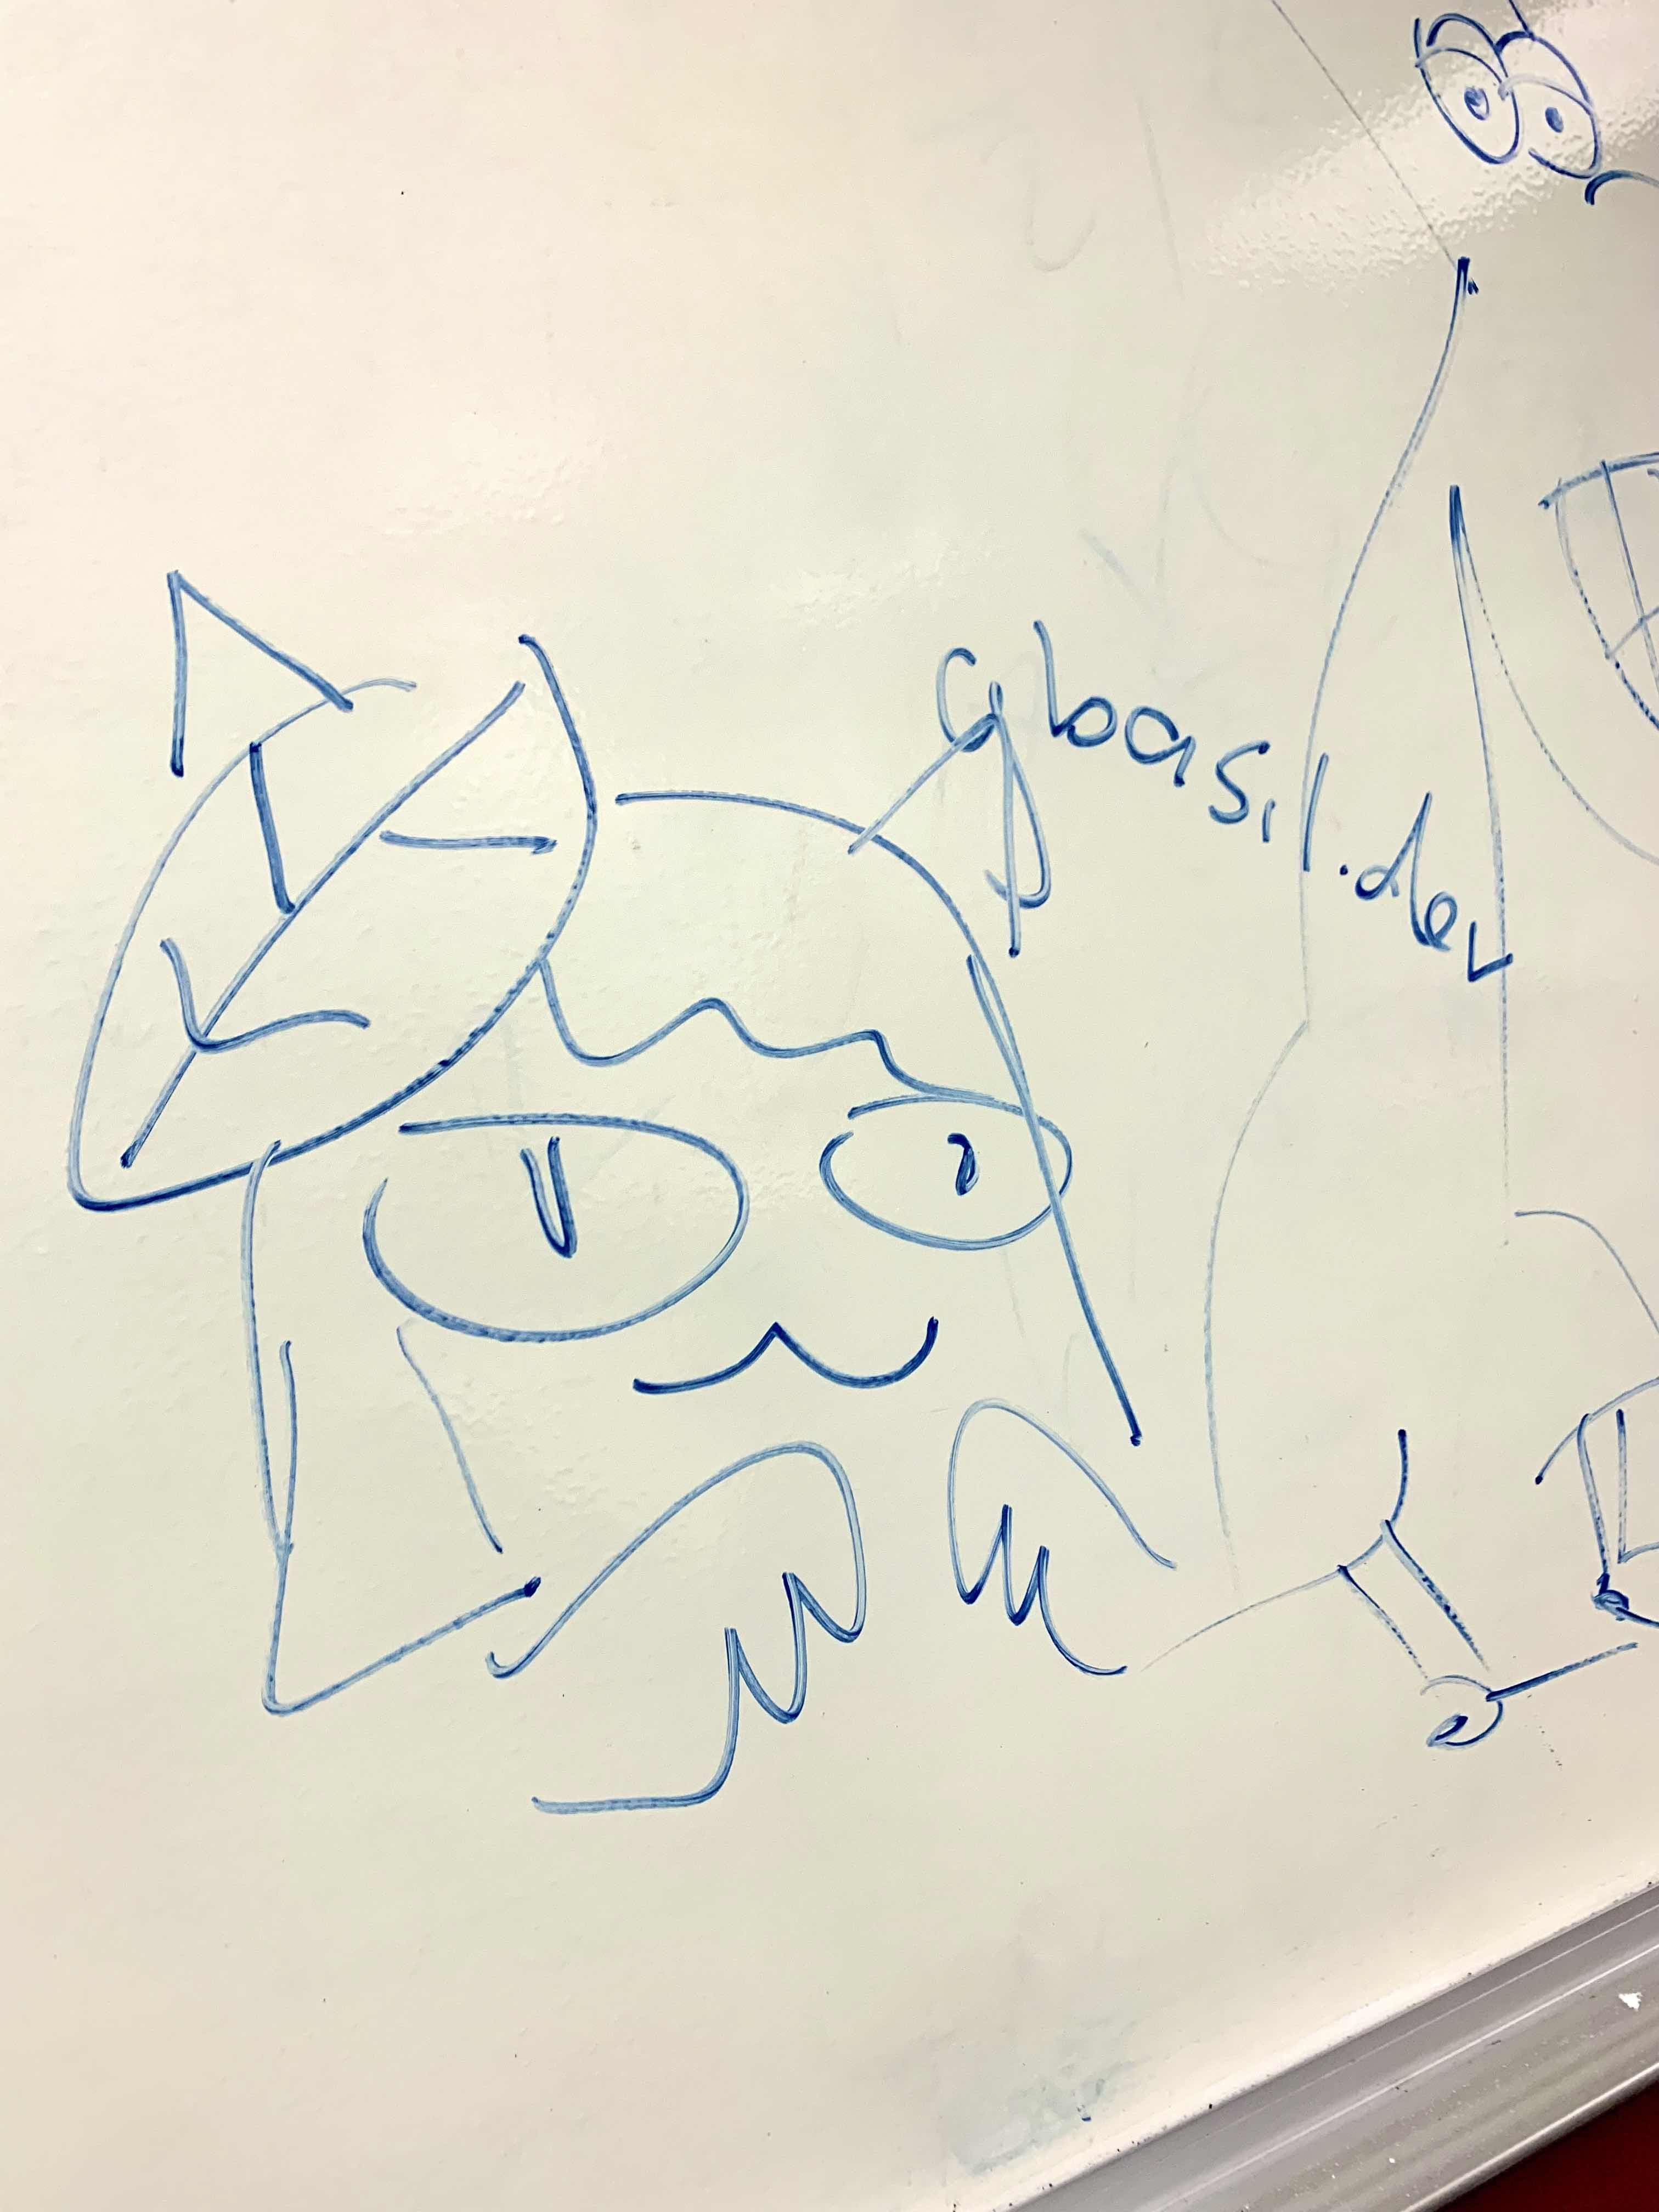 A photo of a drawing on a whiteboard of the head and hands of a catgirl with a large basil leaf on her head. The drawing is made with a blue marker.